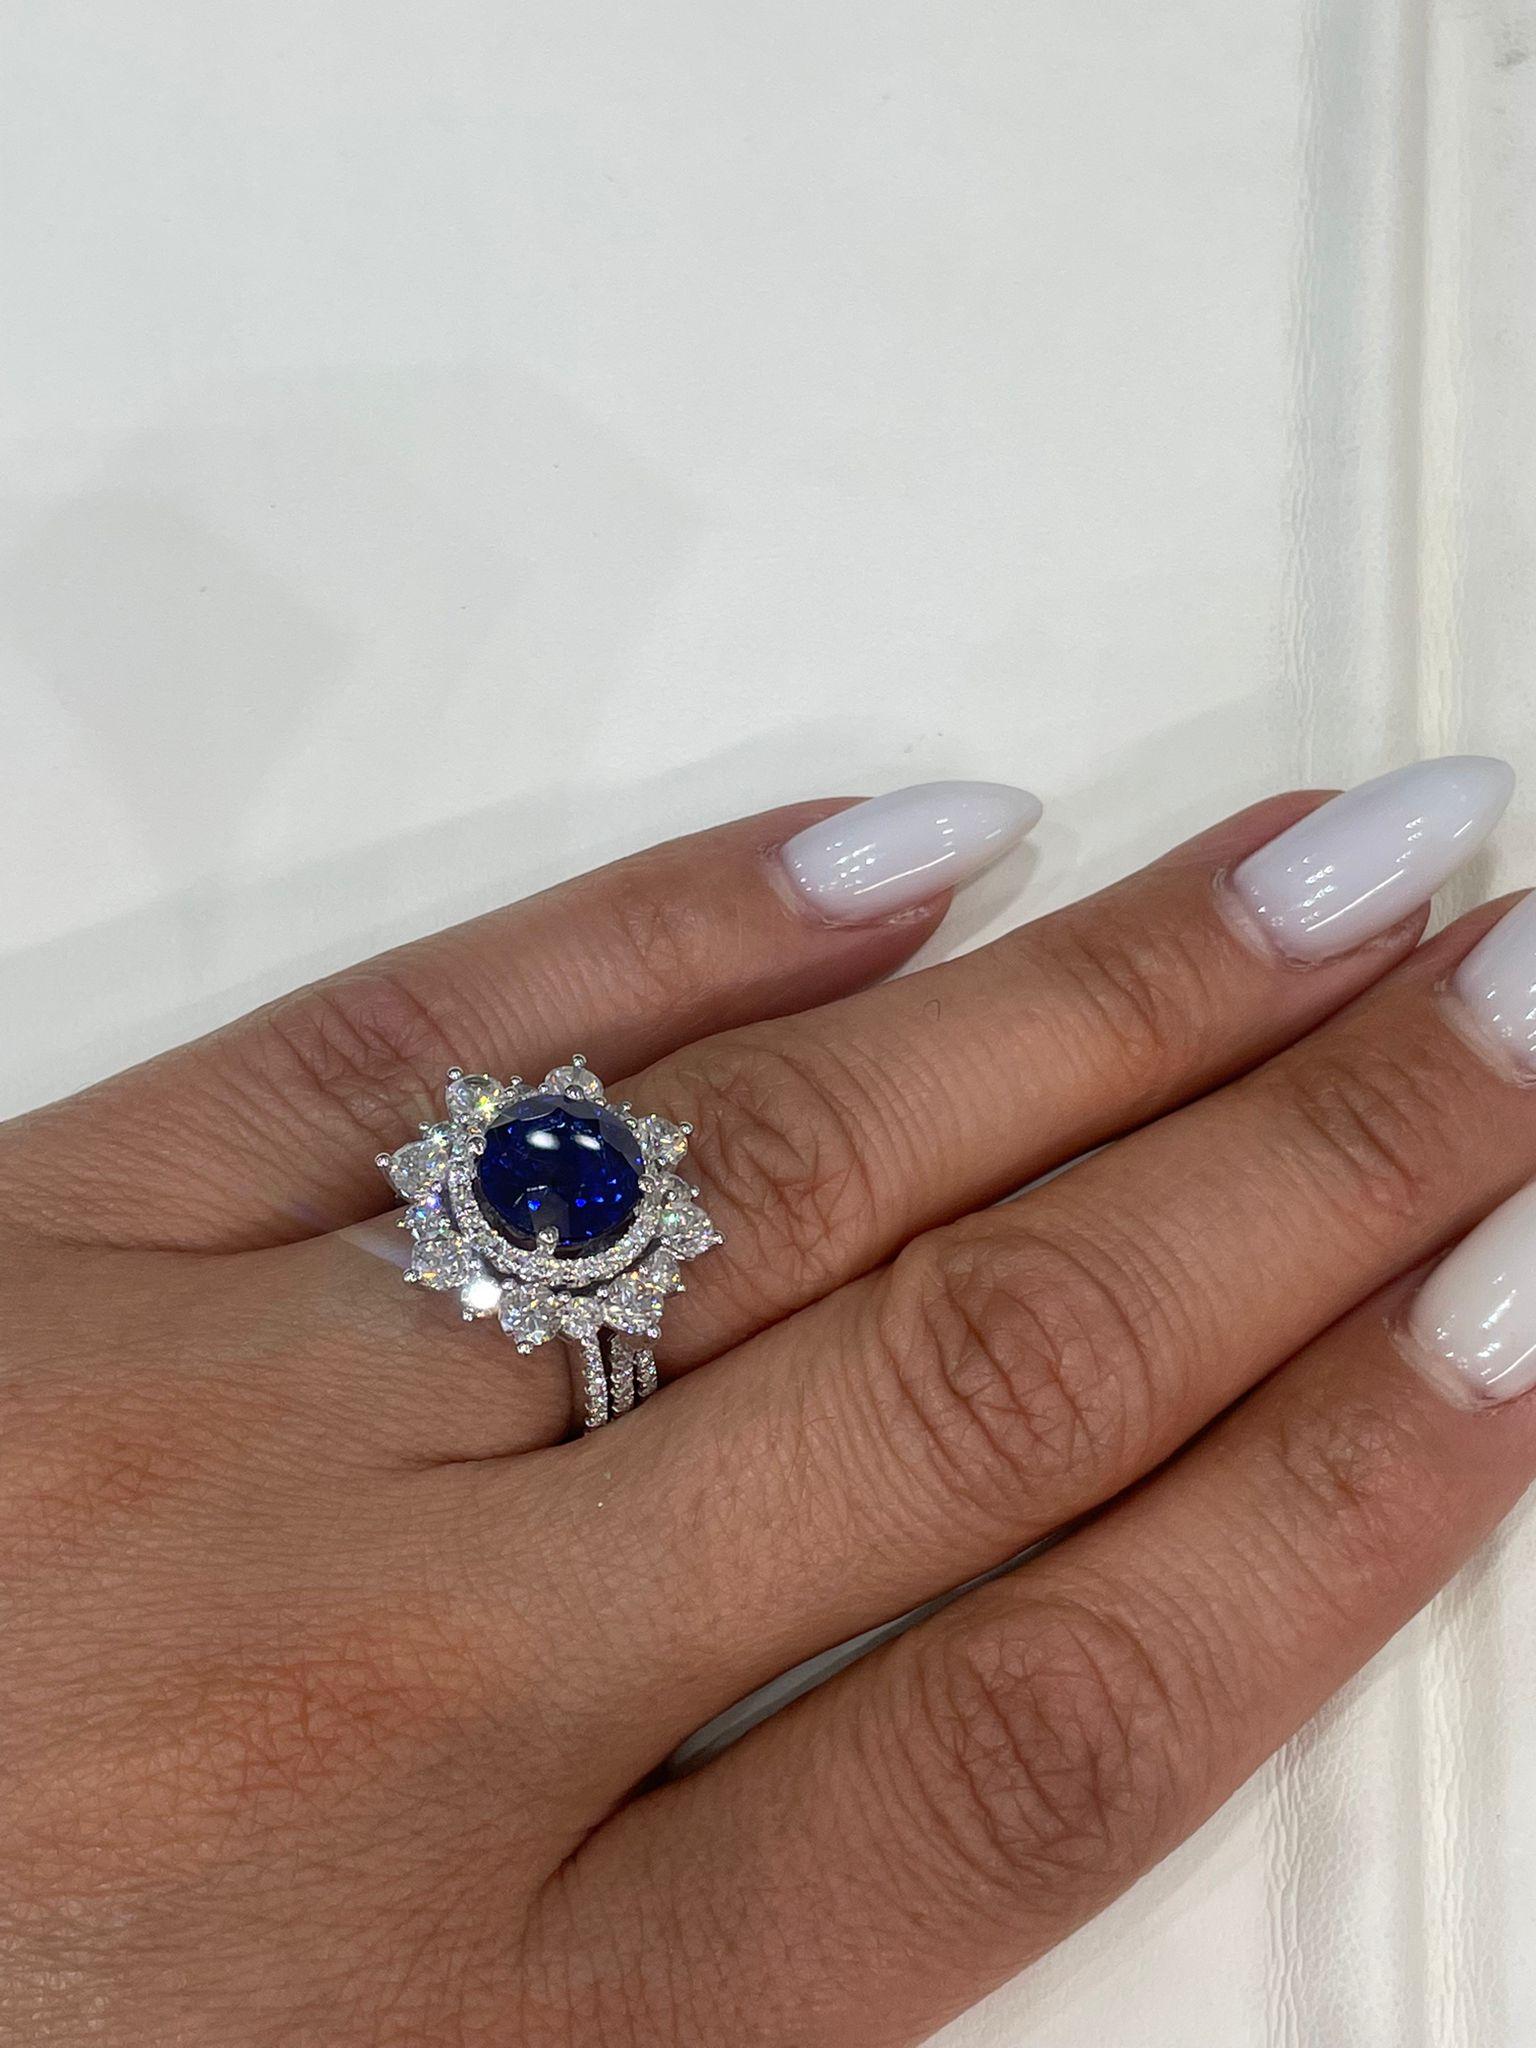 Women's 7 Carat Round Brilliant Blue Sapphire Ring Certified For Sale